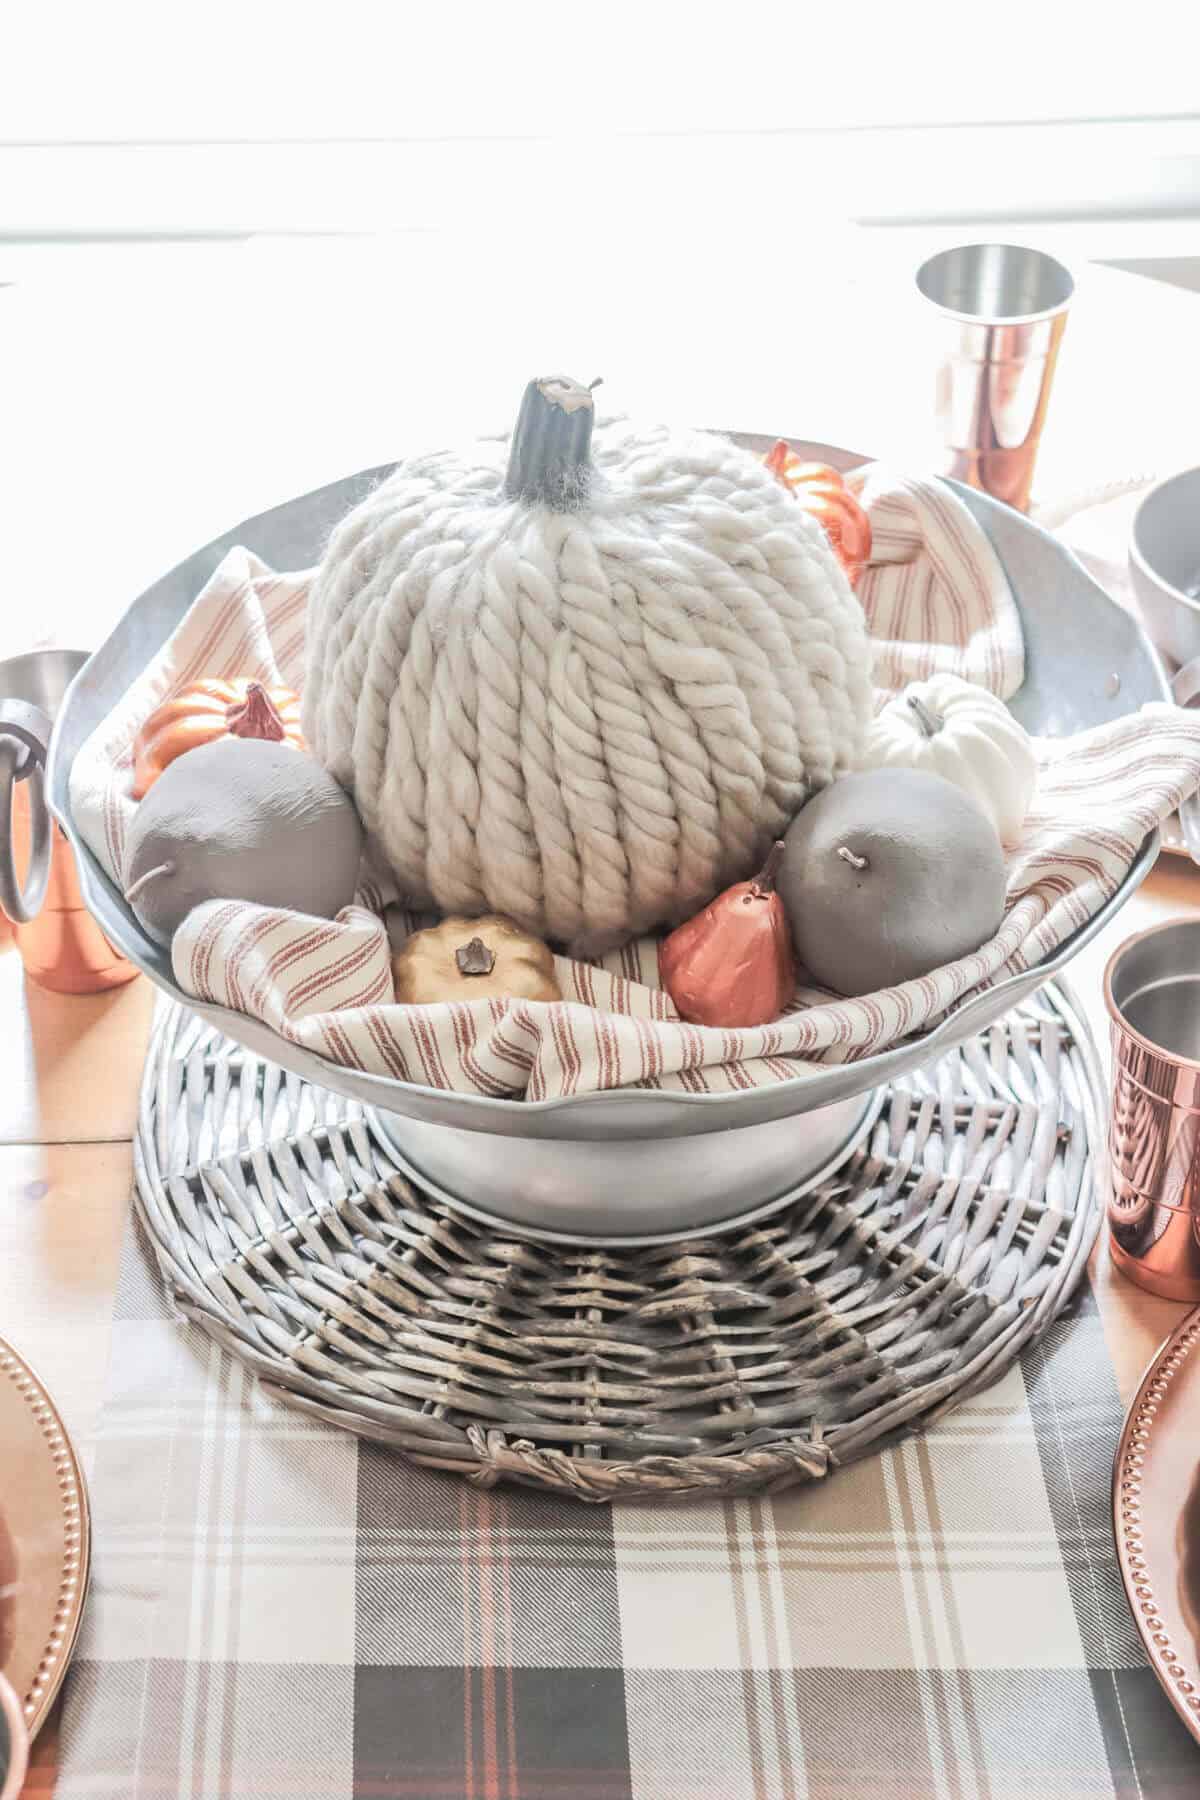 metal centerpiece bowl filled with orange and white striped towel, gray cement pears, a yarn covered pumpkin and copper pumpkins